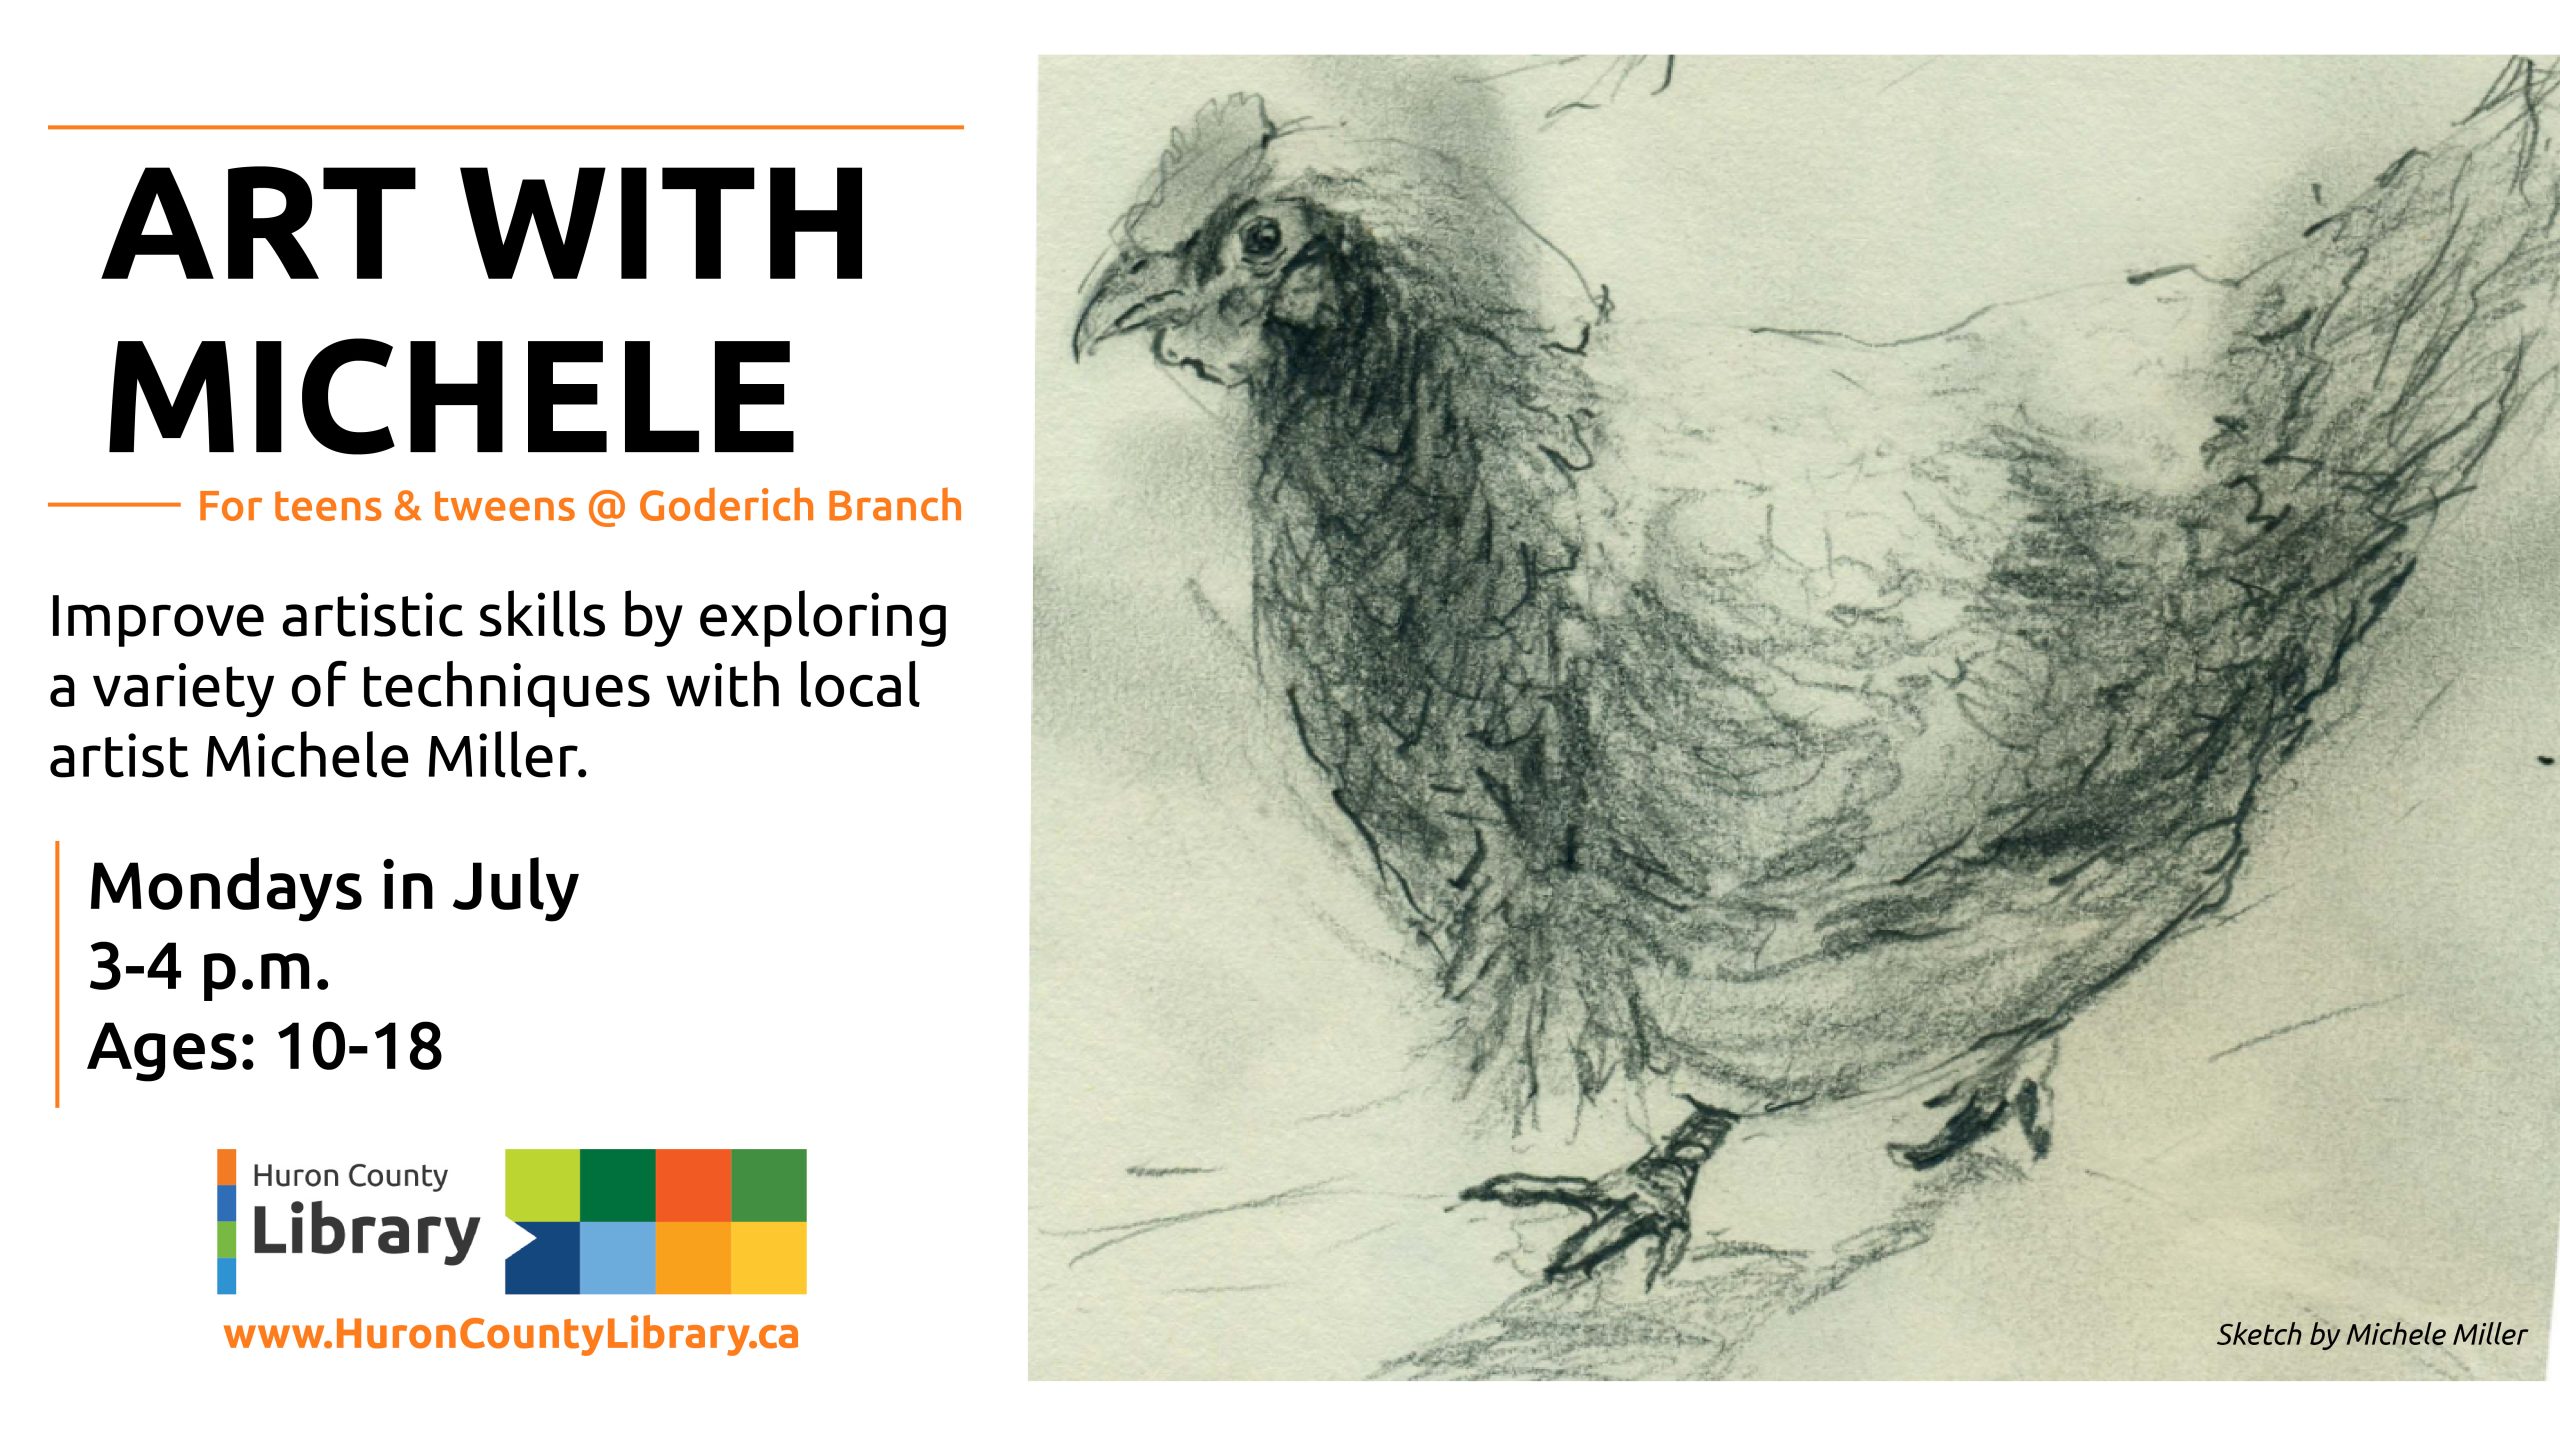 Sketch of a chicken by artist Michele Miller with text promoting Art with Michele at Goderich Branch